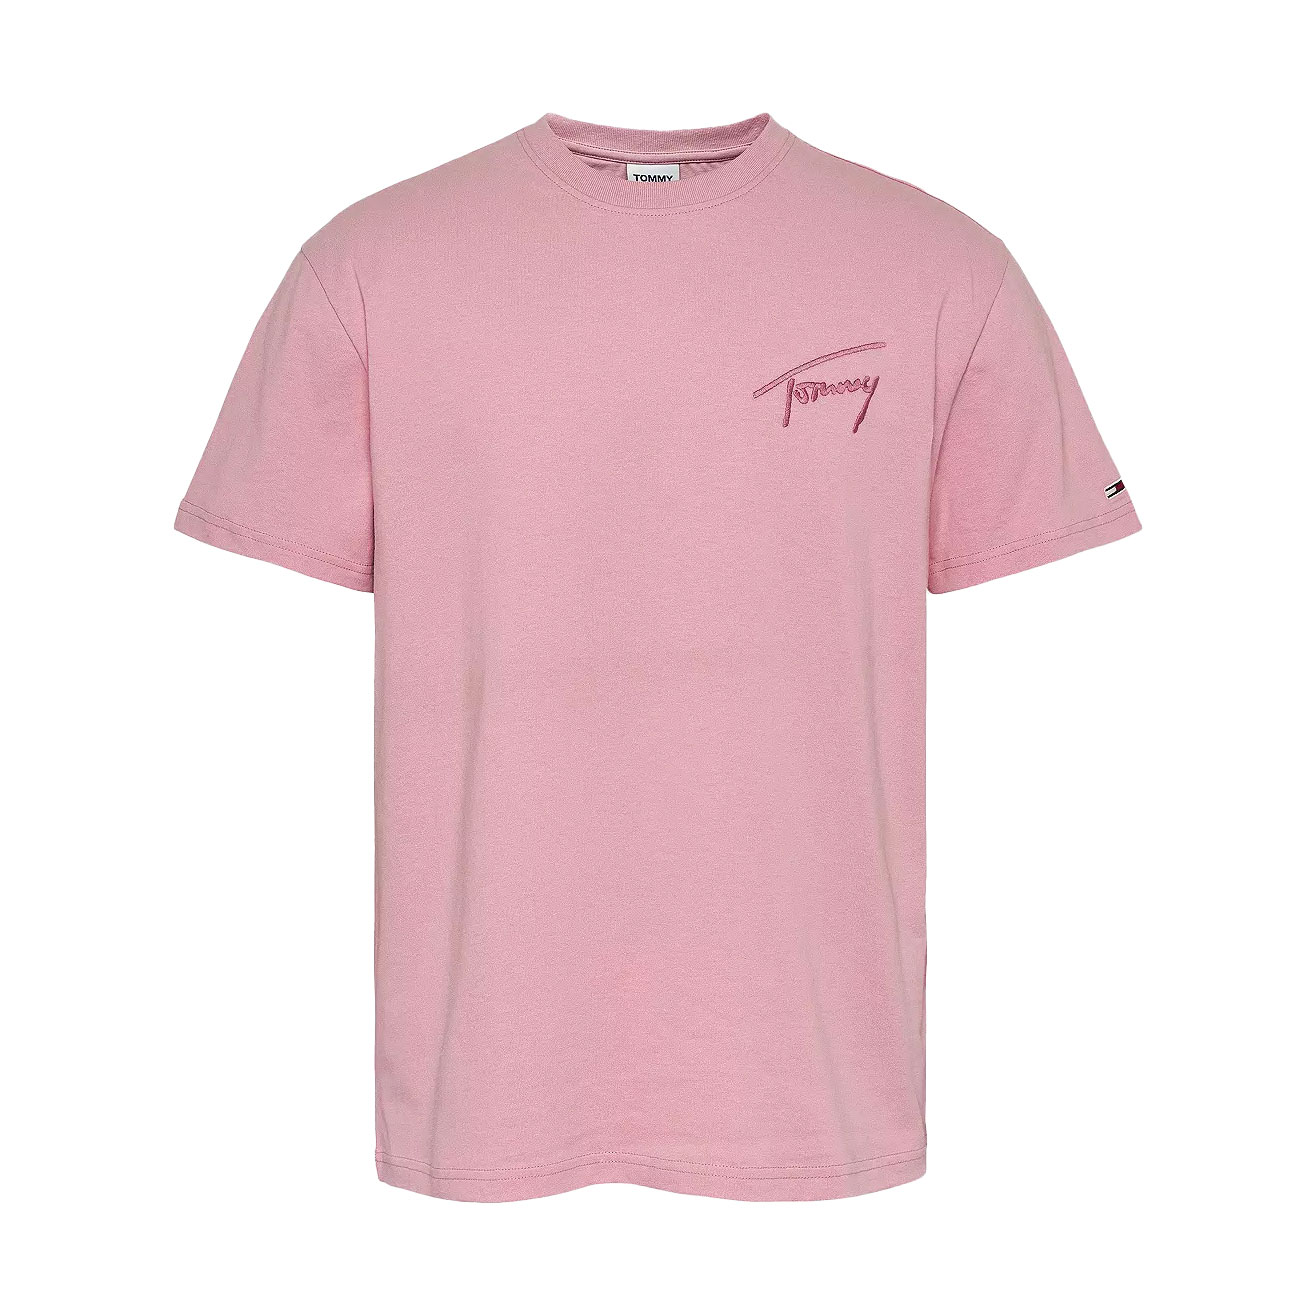 Tommy Signature Tee - Broadway Pink